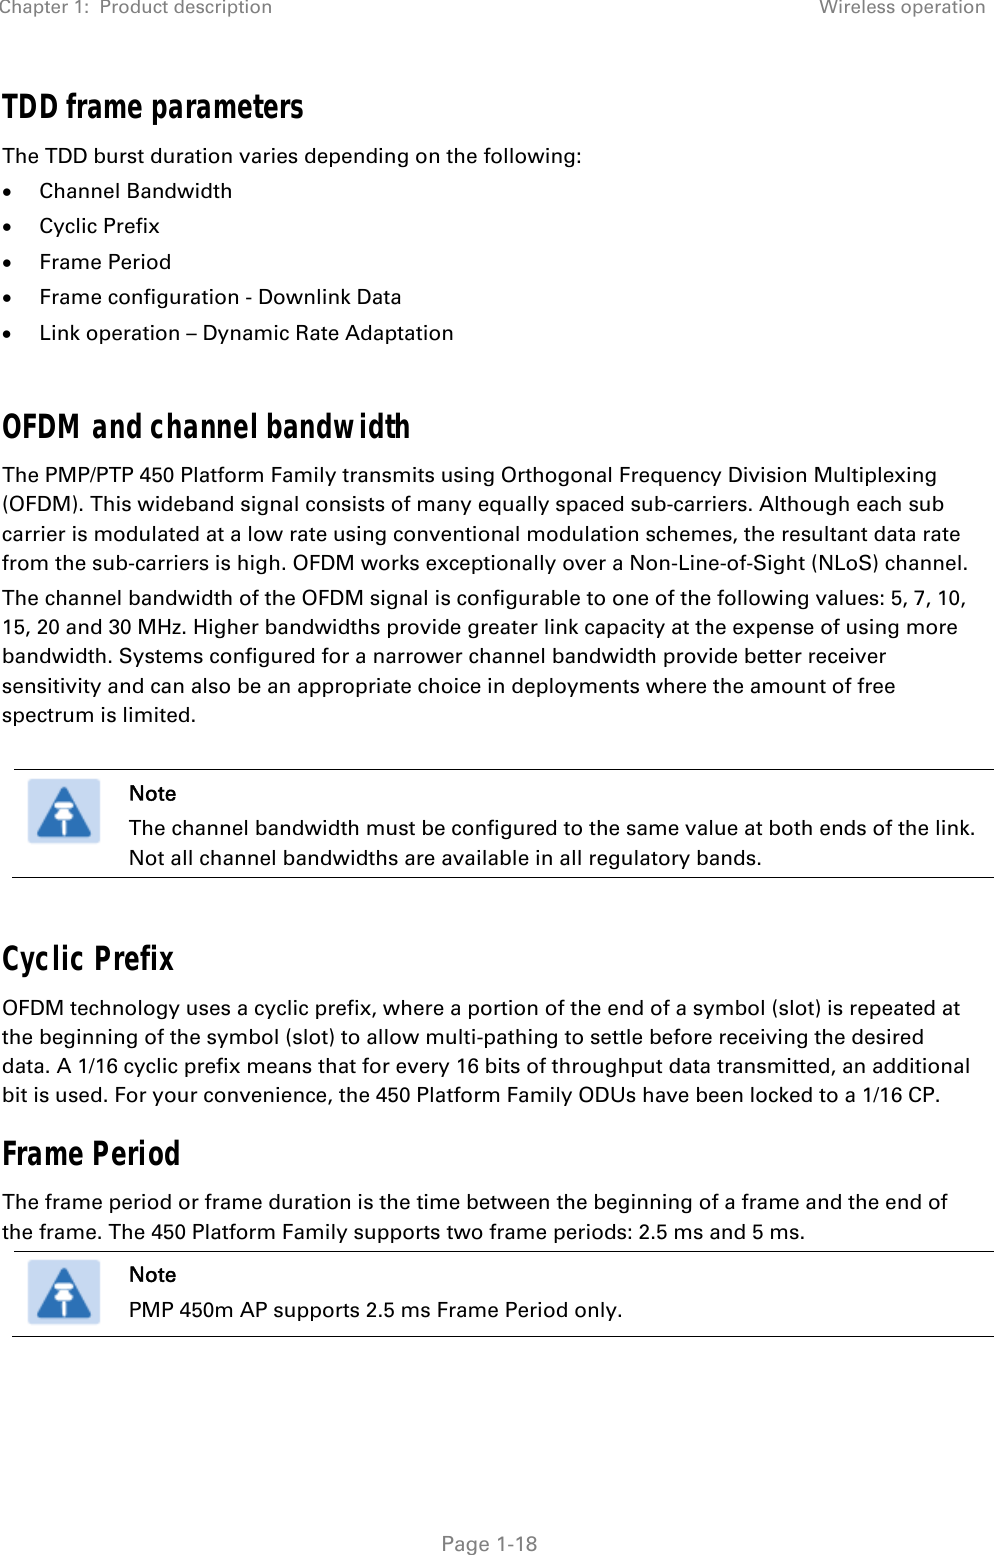 Chapter 1:  Product description Wireless operation   Page 1-18 TDD frame parameters The TDD burst duration varies depending on the following:  Channel Bandwidth  Cyclic Prefix  Frame Period  Frame configuration - Downlink Data  Link operation – Dynamic Rate Adaptation  OFDM and channel bandwidth The PMP/PTP 450 Platform Family transmits using Orthogonal Frequency Division Multiplexing (OFDM). This wideband signal consists of many equally spaced sub-carriers. Although each sub carrier is modulated at a low rate using conventional modulation schemes, the resultant data rate from the sub-carriers is high. OFDM works exceptionally over a Non-Line-of-Sight (NLoS) channel.  The channel bandwidth of the OFDM signal is configurable to one of the following values: 5, 7, 10, 15, 20 and 30 MHz. Higher bandwidths provide greater link capacity at the expense of using more bandwidth. Systems configured for a narrower channel bandwidth provide better receiver sensitivity and can also be an appropriate choice in deployments where the amount of free spectrum is limited.   Note The channel bandwidth must be configured to the same value at both ends of the link. Not all channel bandwidths are available in all regulatory bands.  Cyclic Prefix OFDM technology uses a cyclic prefix, where a portion of the end of a symbol (slot) is repeated at the beginning of the symbol (slot) to allow multi-pathing to settle before receiving the desired data. A 1/16 cyclic prefix means that for every 16 bits of throughput data transmitted, an additional bit is used. For your convenience, the 450 Platform Family ODUs have been locked to a 1/16 CP. Frame Period  The frame period or frame duration is the time between the beginning of a frame and the end of the frame. The 450 Platform Family supports two frame periods: 2.5 ms and 5 ms.   Note PMP 450m AP supports 2.5 ms Frame Period only.  